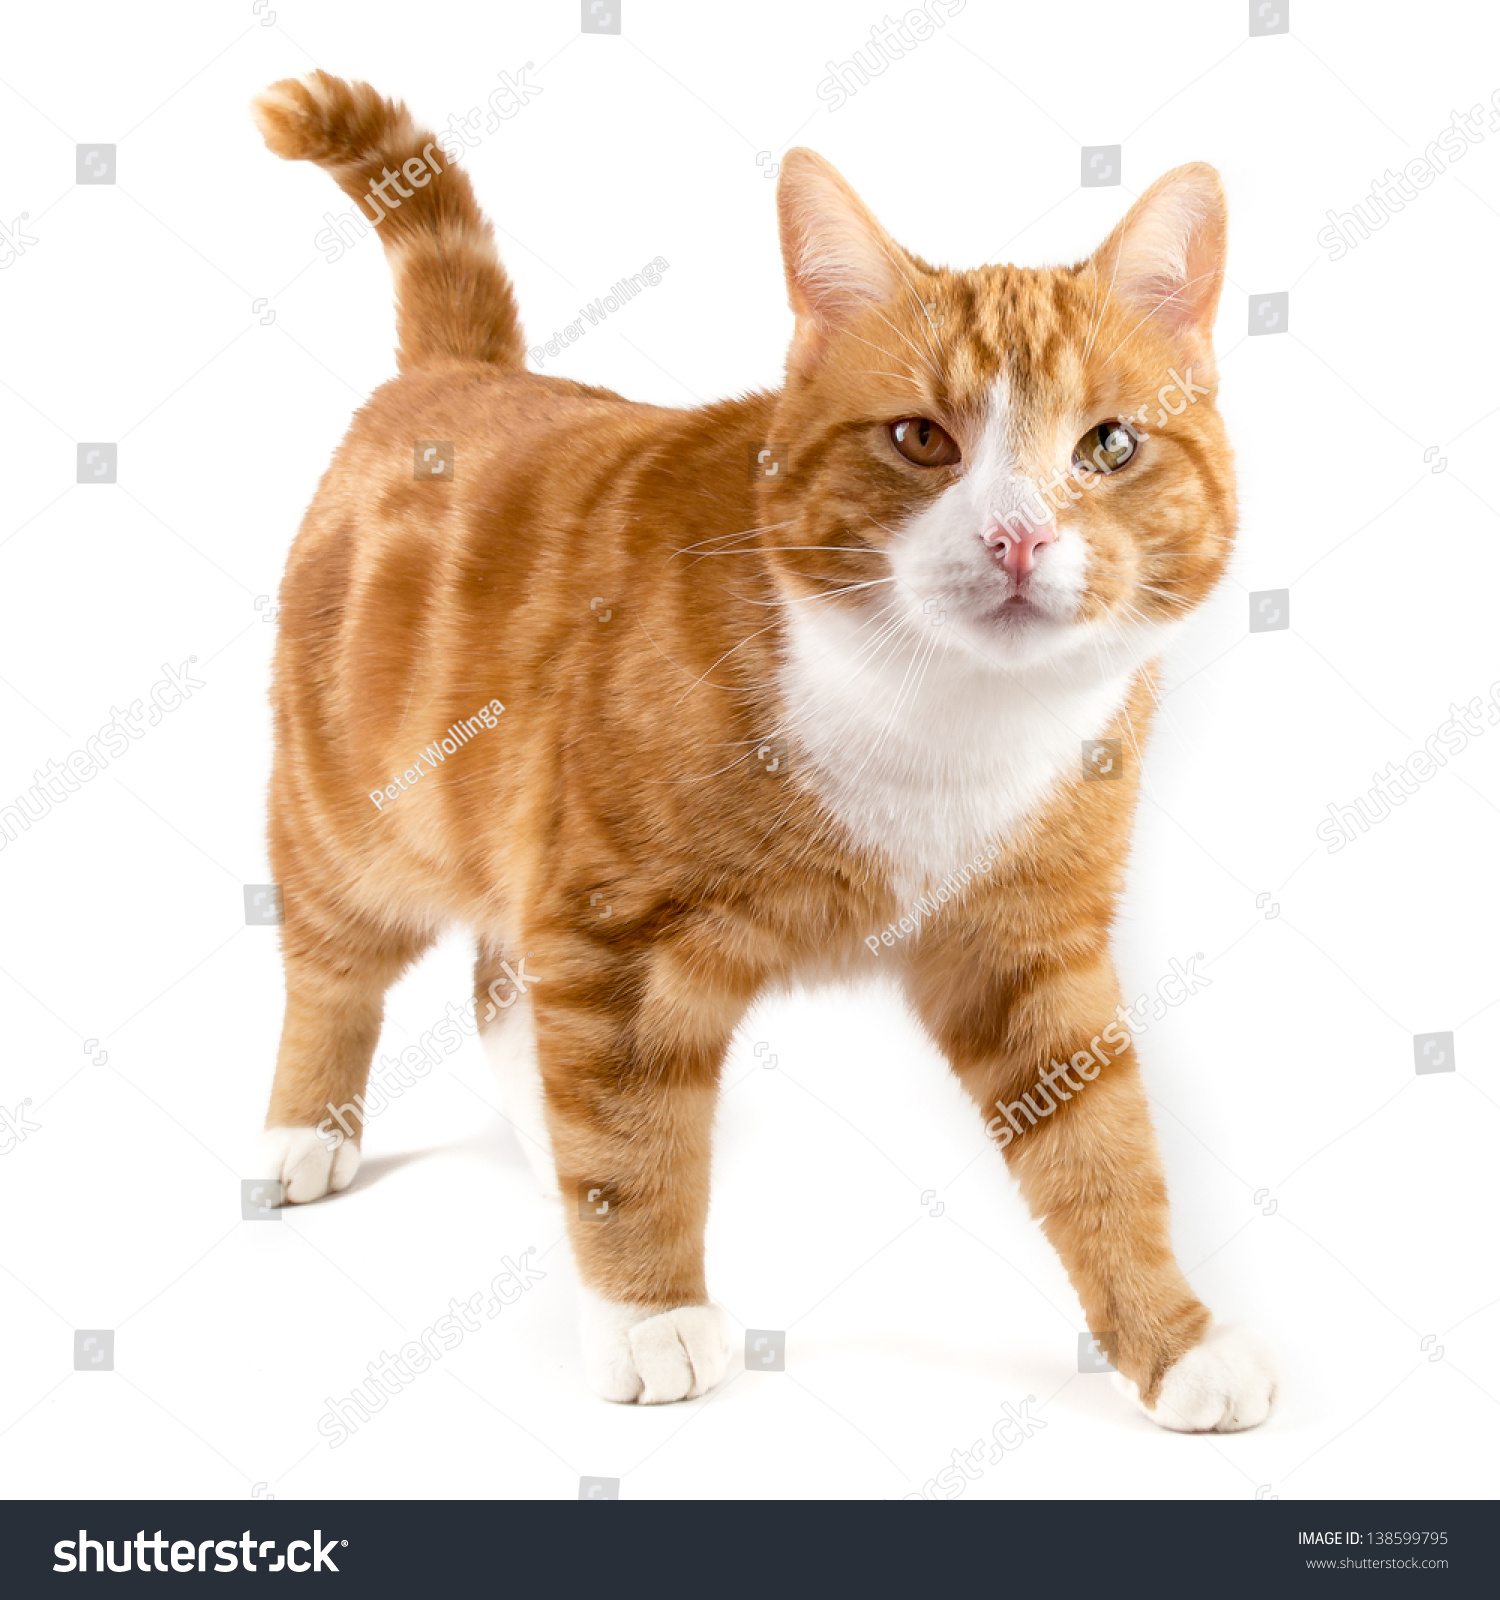 stock-photo-red-male-cat-walking-towards-camera-isolated-in-white-138599795.jpg